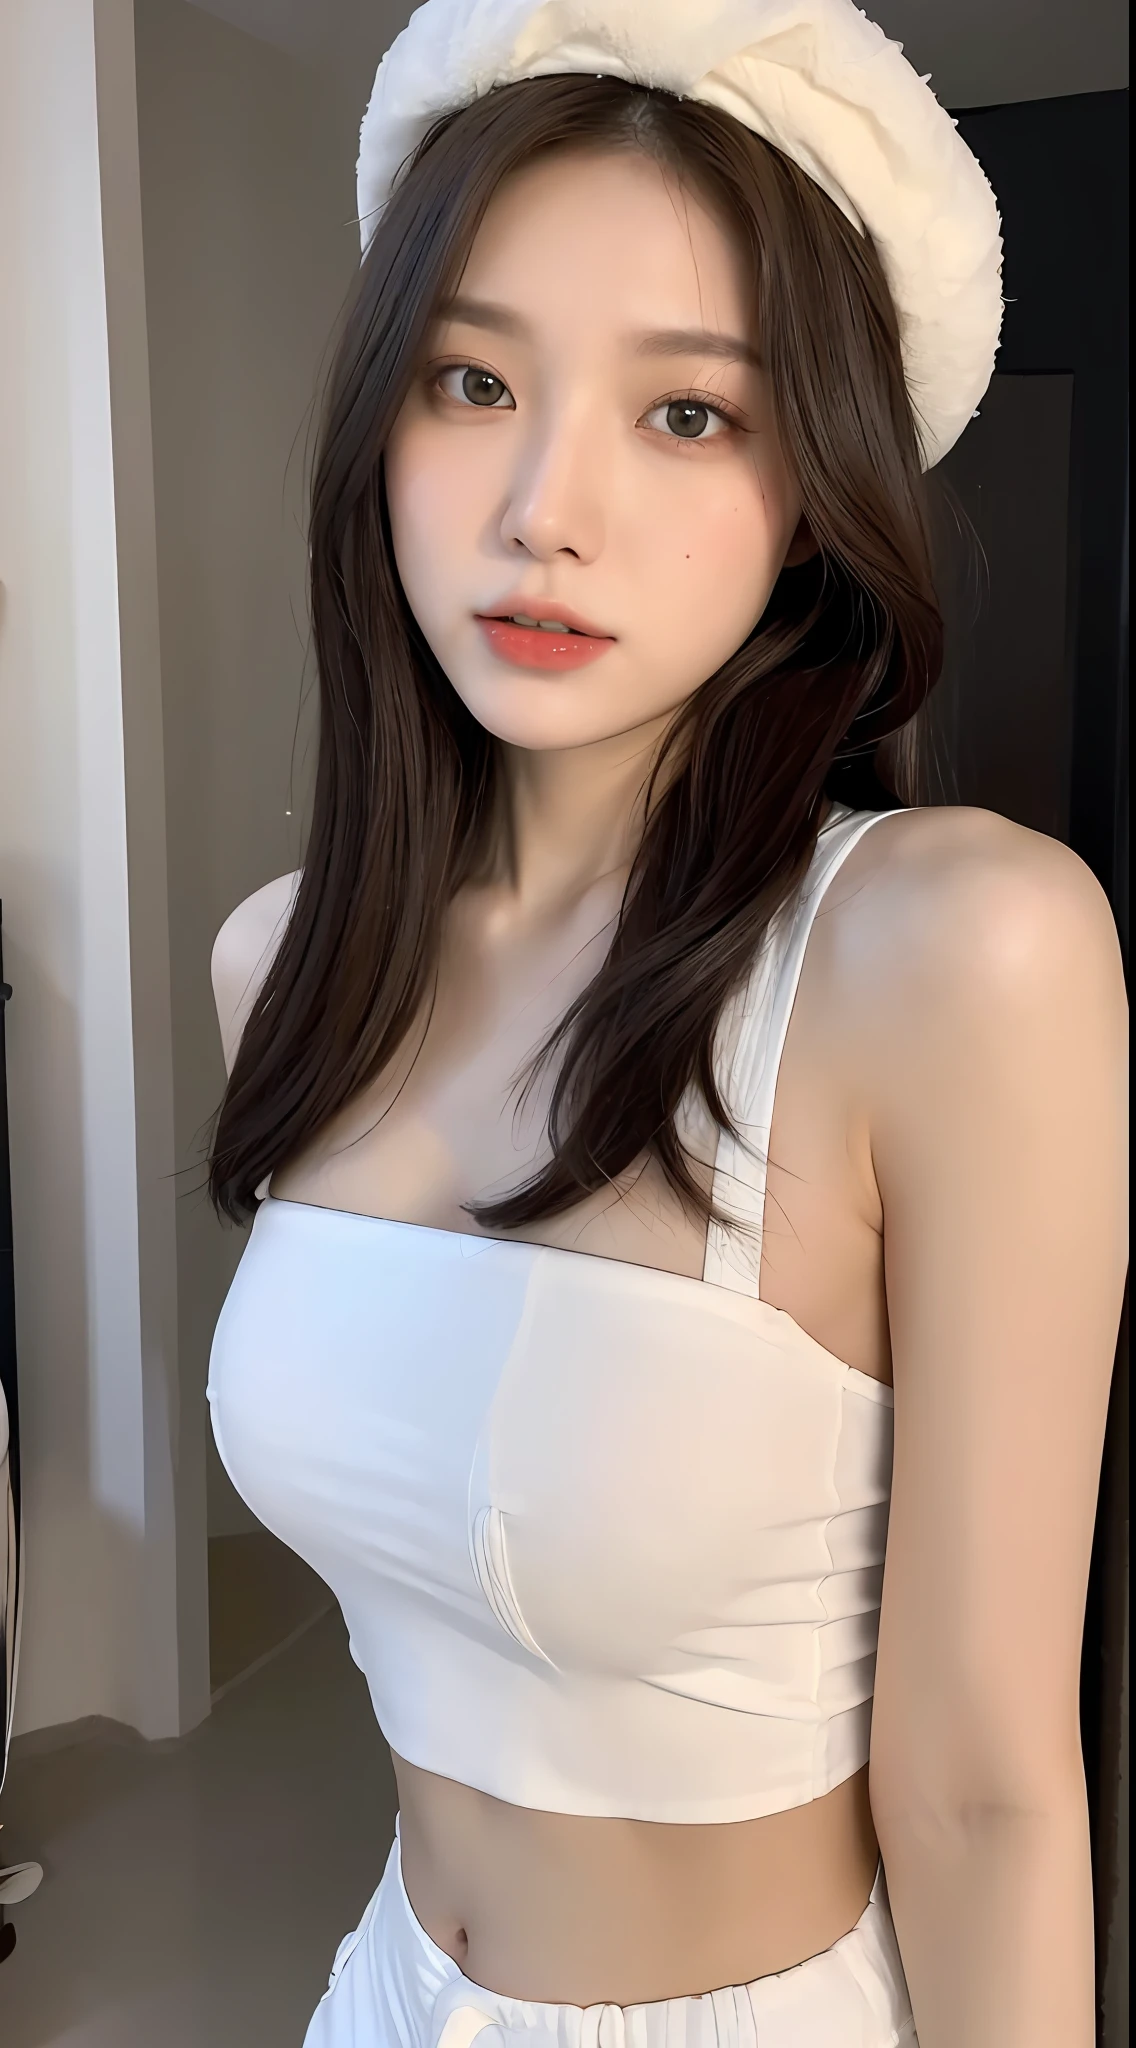 ((Best Quality, 8K, Masterpiece: 1.3)), (Flower Cap: 1.3), Focus: 1.2, Perfect Body Beauty: 1.4, Buttocks: 1.2, (Layered Haircut: 1.2)), (Dark Street: 1.3), Highly Detailed Face and Skin Texture, Full Body, Delicate Eyes, Double Eyelids, Whitened Skin, Long Hair, (Round Face: 1.5), (Loose Crop Top, Shorts: 1.6)